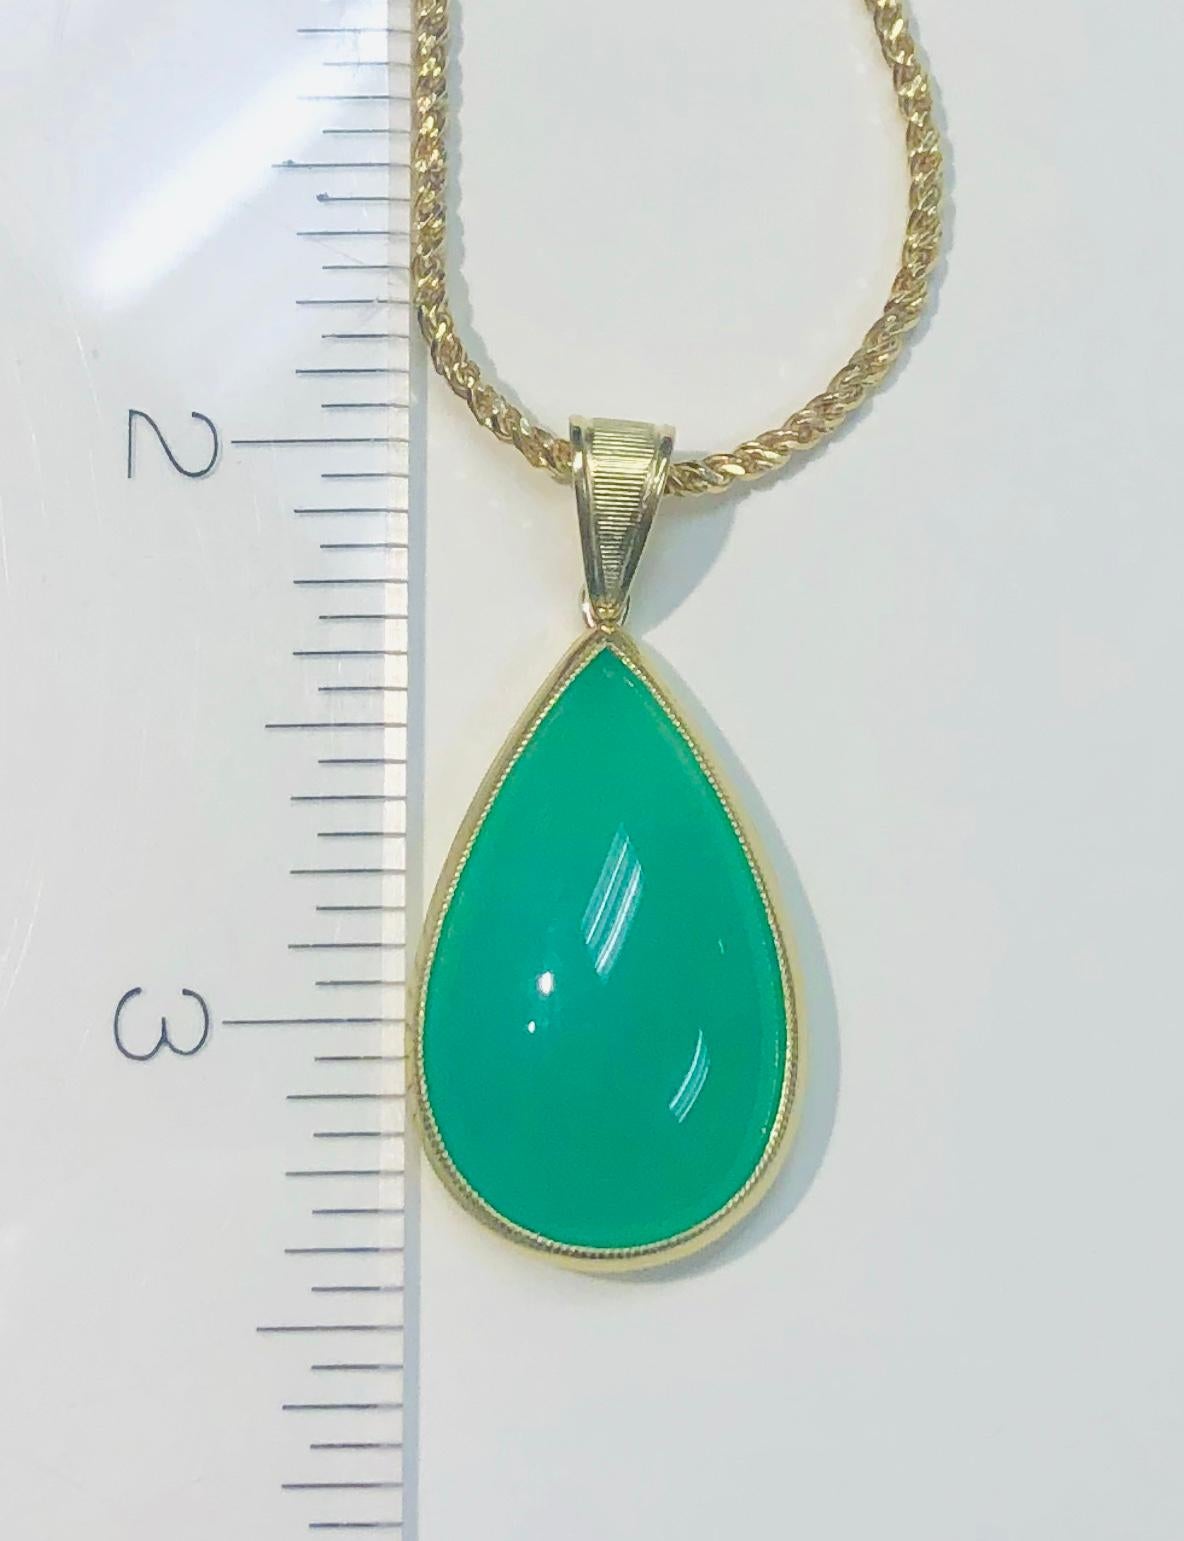 This beautiful pendant features an alluring 19.49 carat pear shaped chrysoprase cabochon of absolutely exquisite color! Chrysoprase is a lovely variety of quartz chalcedony, characterized by its distinctive green hue and gorgeous appearance. Set in